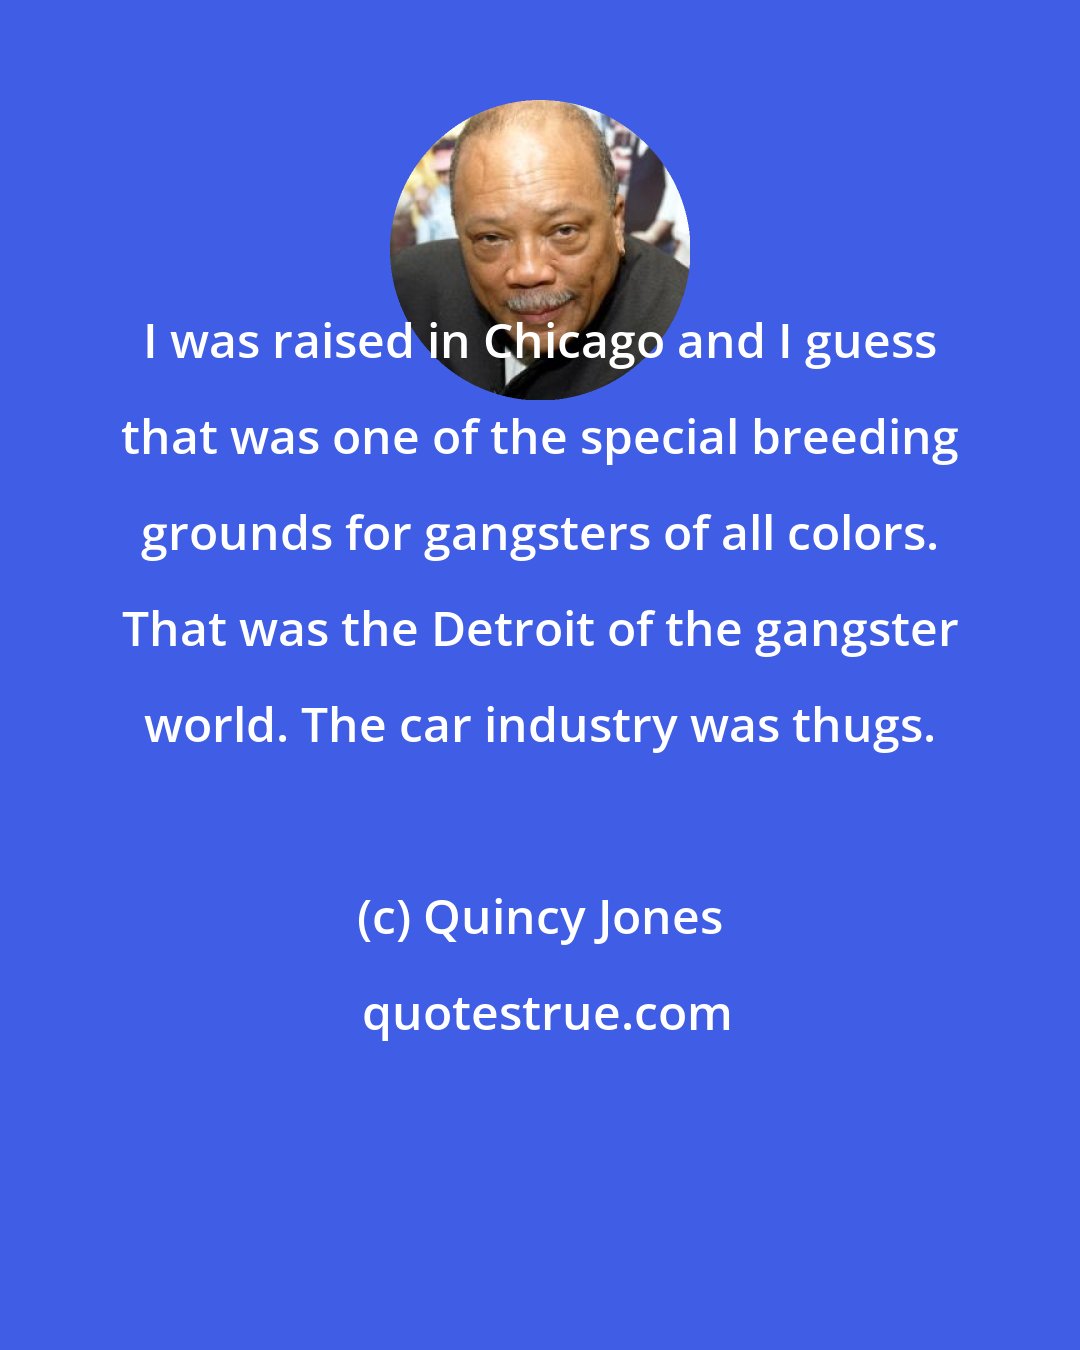 Quincy Jones: I was raised in Chicago and I guess that was one of the special breeding grounds for gangsters of all colors. That was the Detroit of the gangster world. The car industry was thugs.